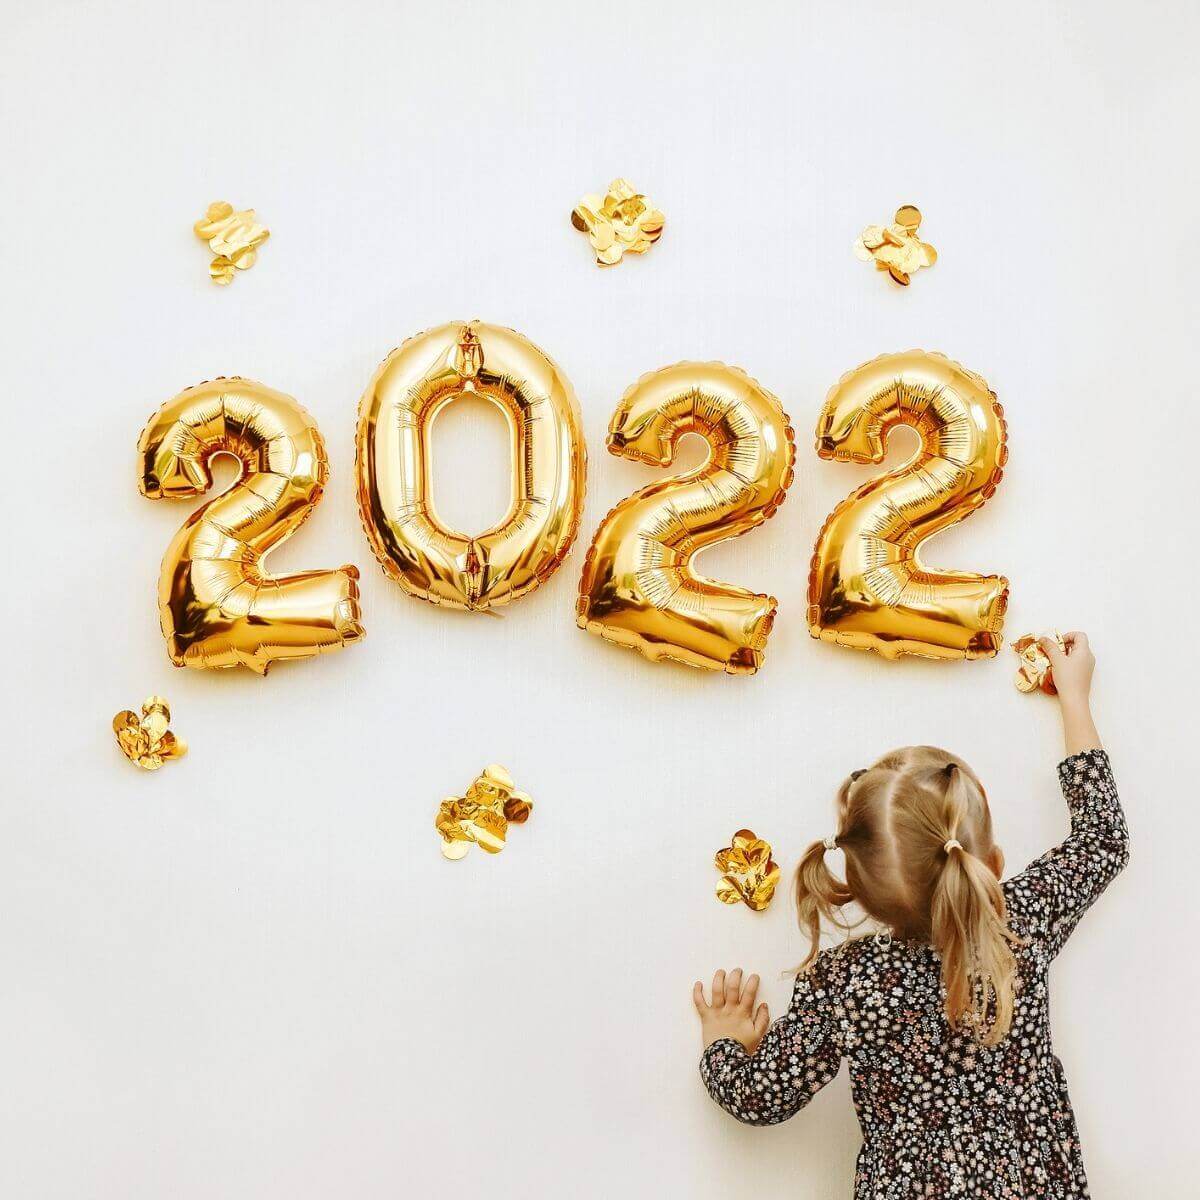 2022 in gold with little blonde girl in a black polka dot dress and pigtails putting a gold star near the numbers